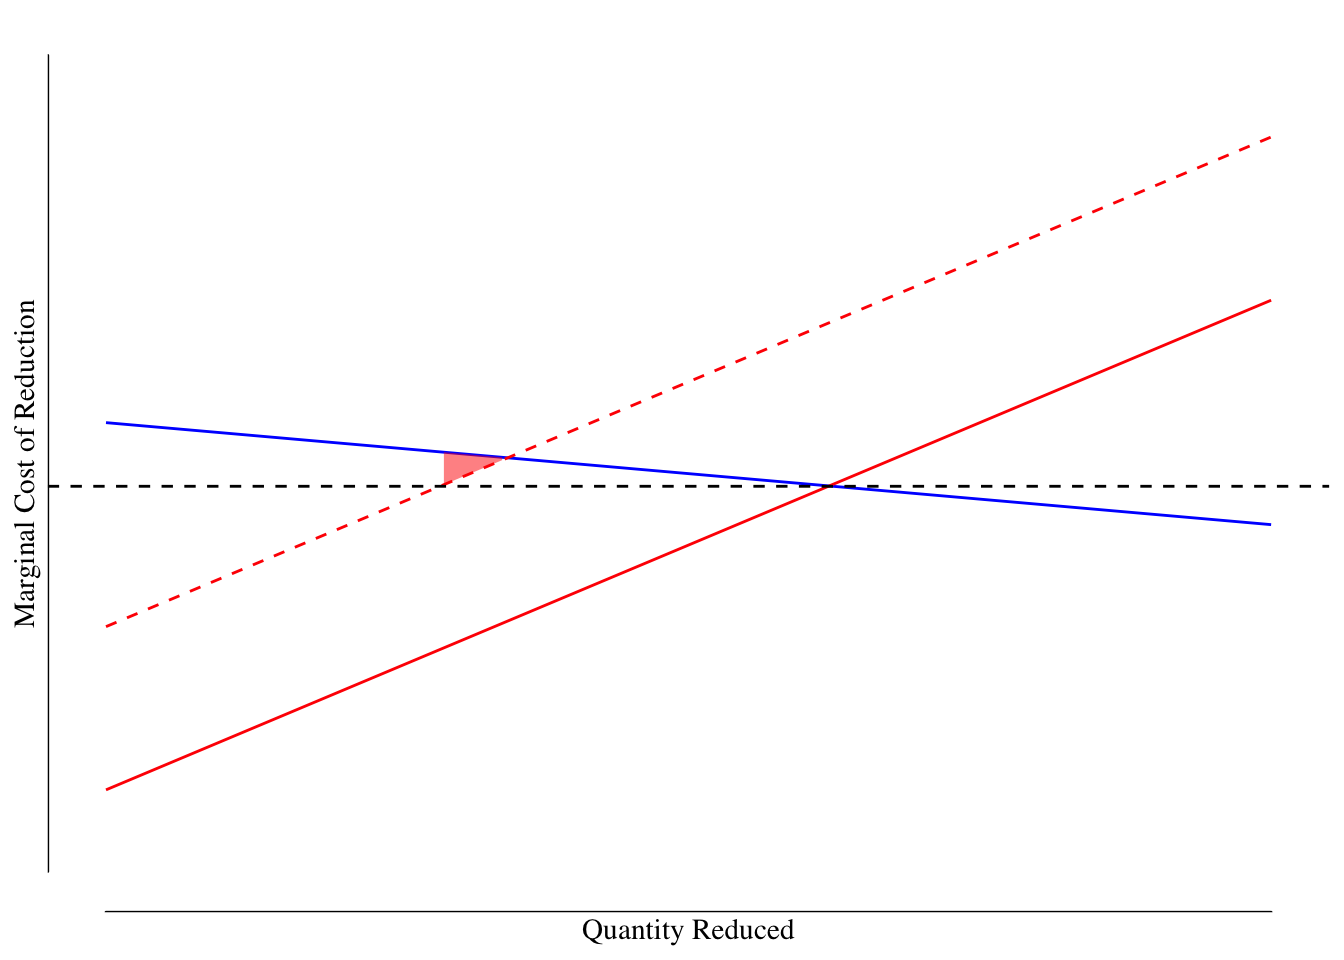 Market for $ ext{CO}_2$ Reductions With Uncertainity: Taxes. The best estimate of the marginal cost of reductions is shown as a solid red line and the societal marginal benefit is shown as a blue line. However, the true marginal cost (dashed red line) is higher. The black line denotes the reduction required by the government based on the estimated marginal cost. The dashed black line denotes the tax charged per unit of carbon. The deadweight loss for this policy is shown in the red shaded triangle.